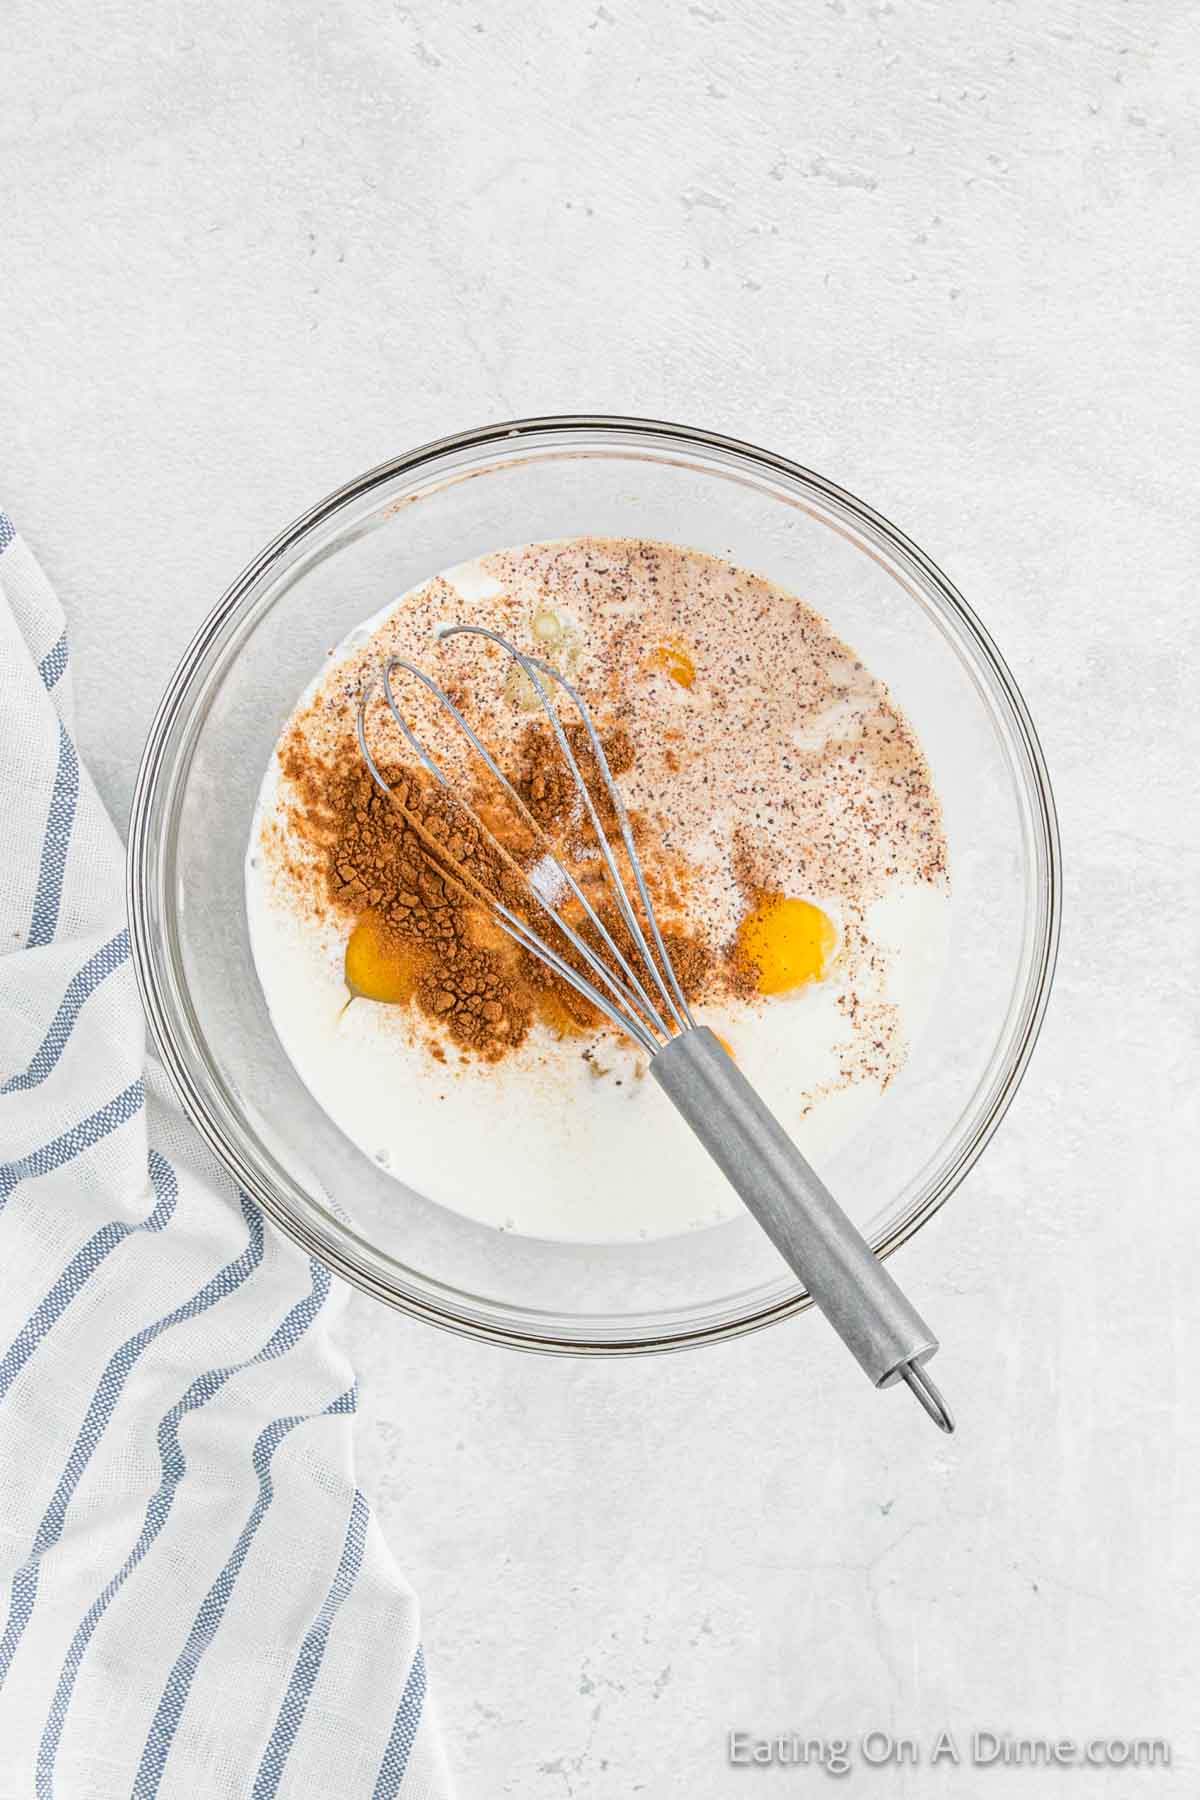 Milk, sugar, vanilla extract, cinnamon and nutmeg in a bowl with a whisk